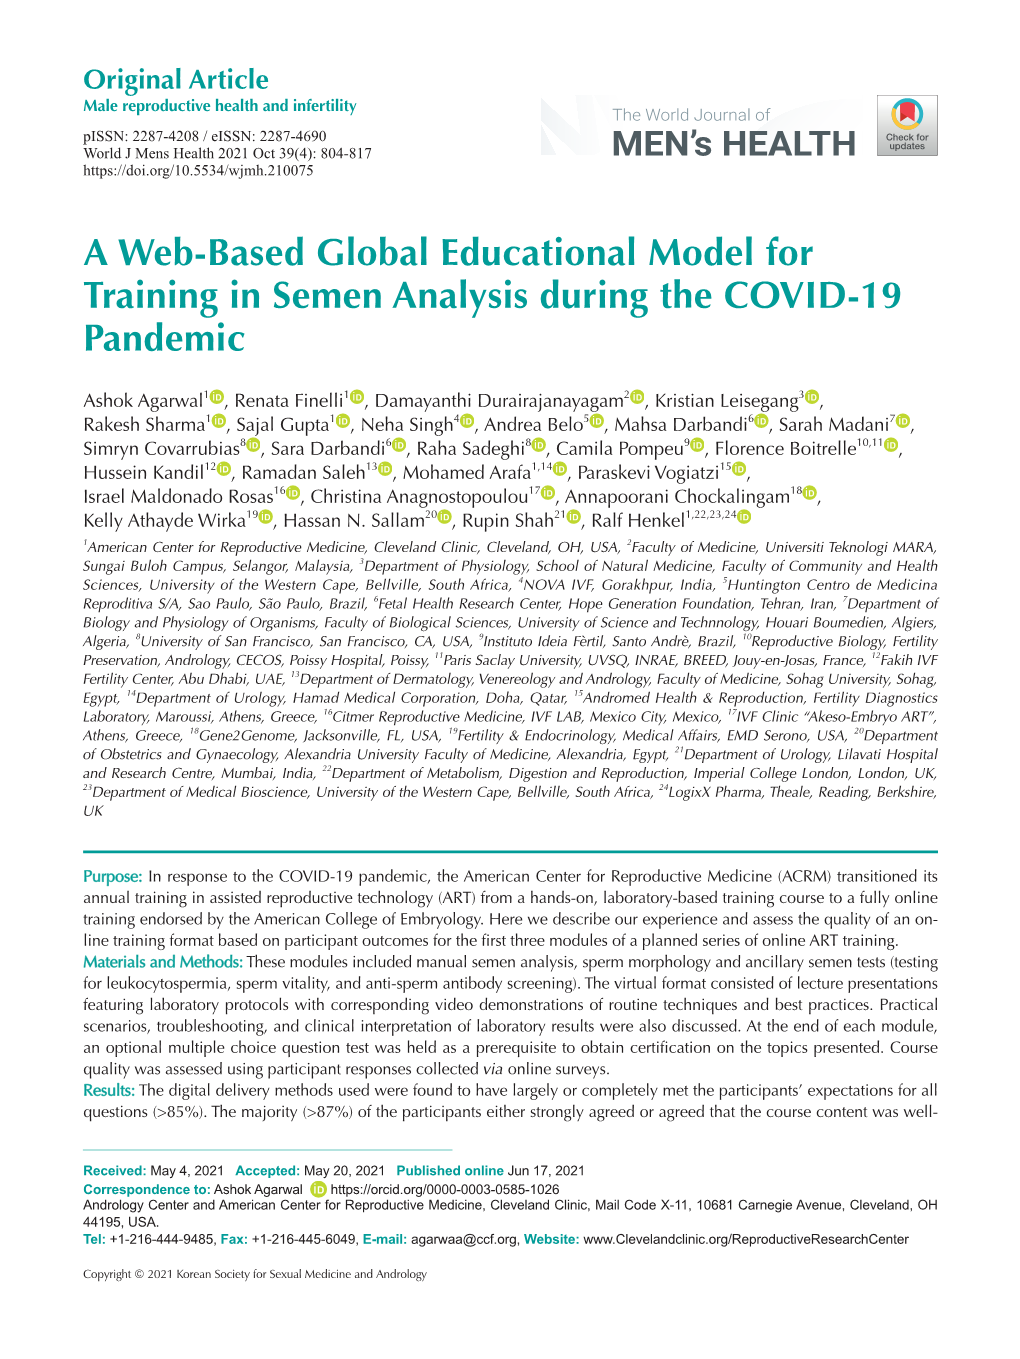 A Web-Based Global Educational Model for Training in Semen Analysis During the COVID-19 Pandemic